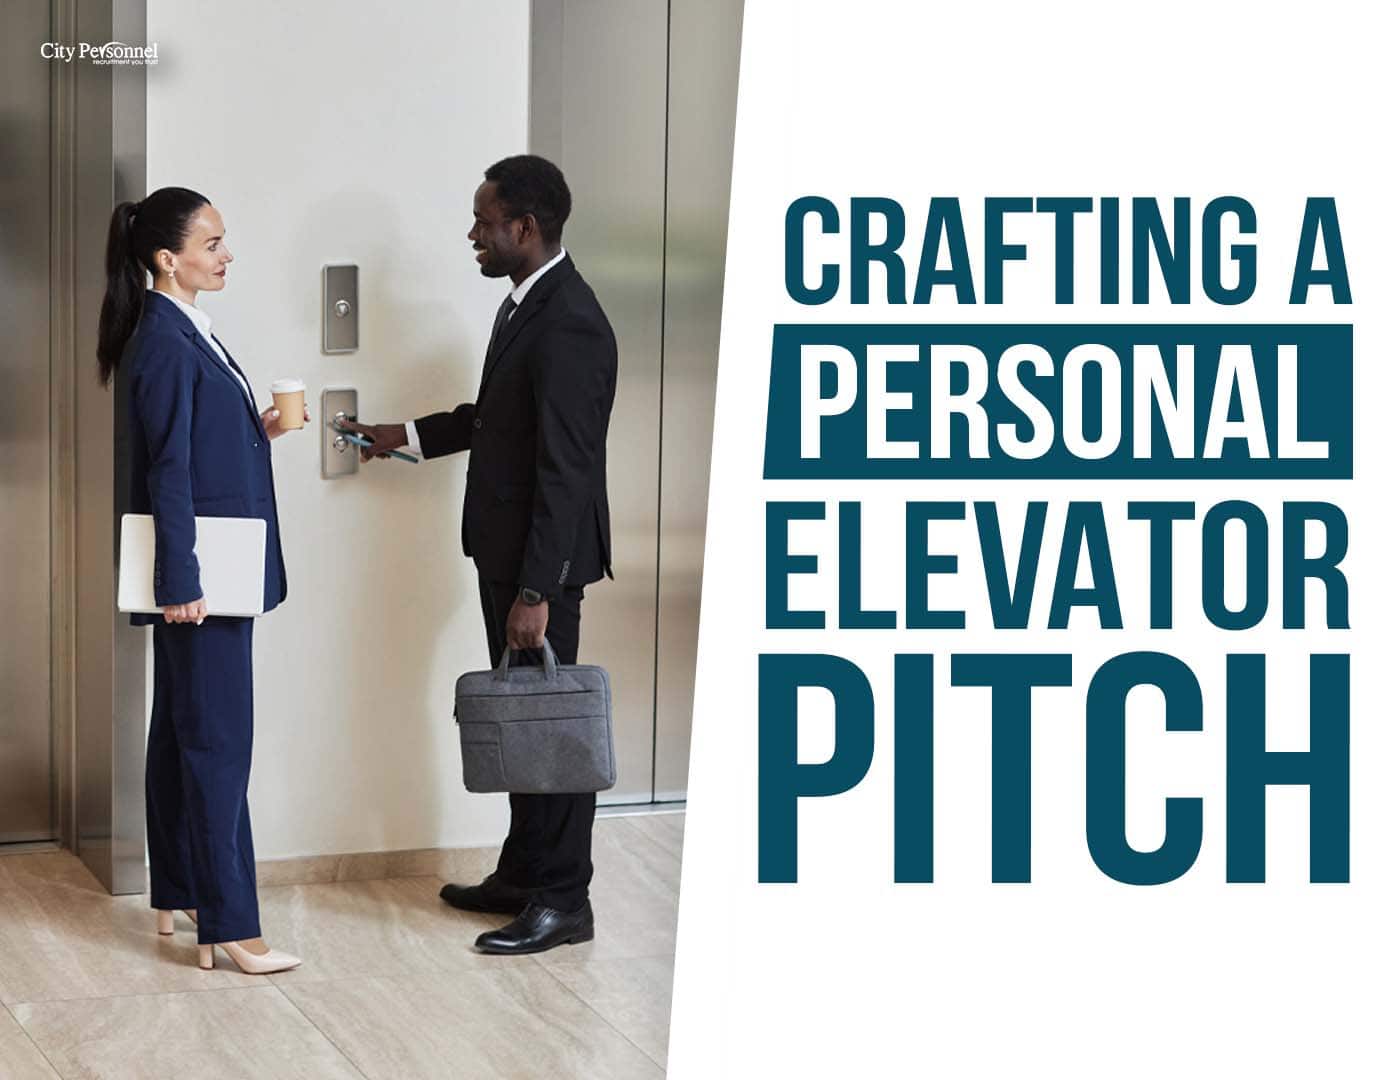 Crafting a Personal Elevator Pitch